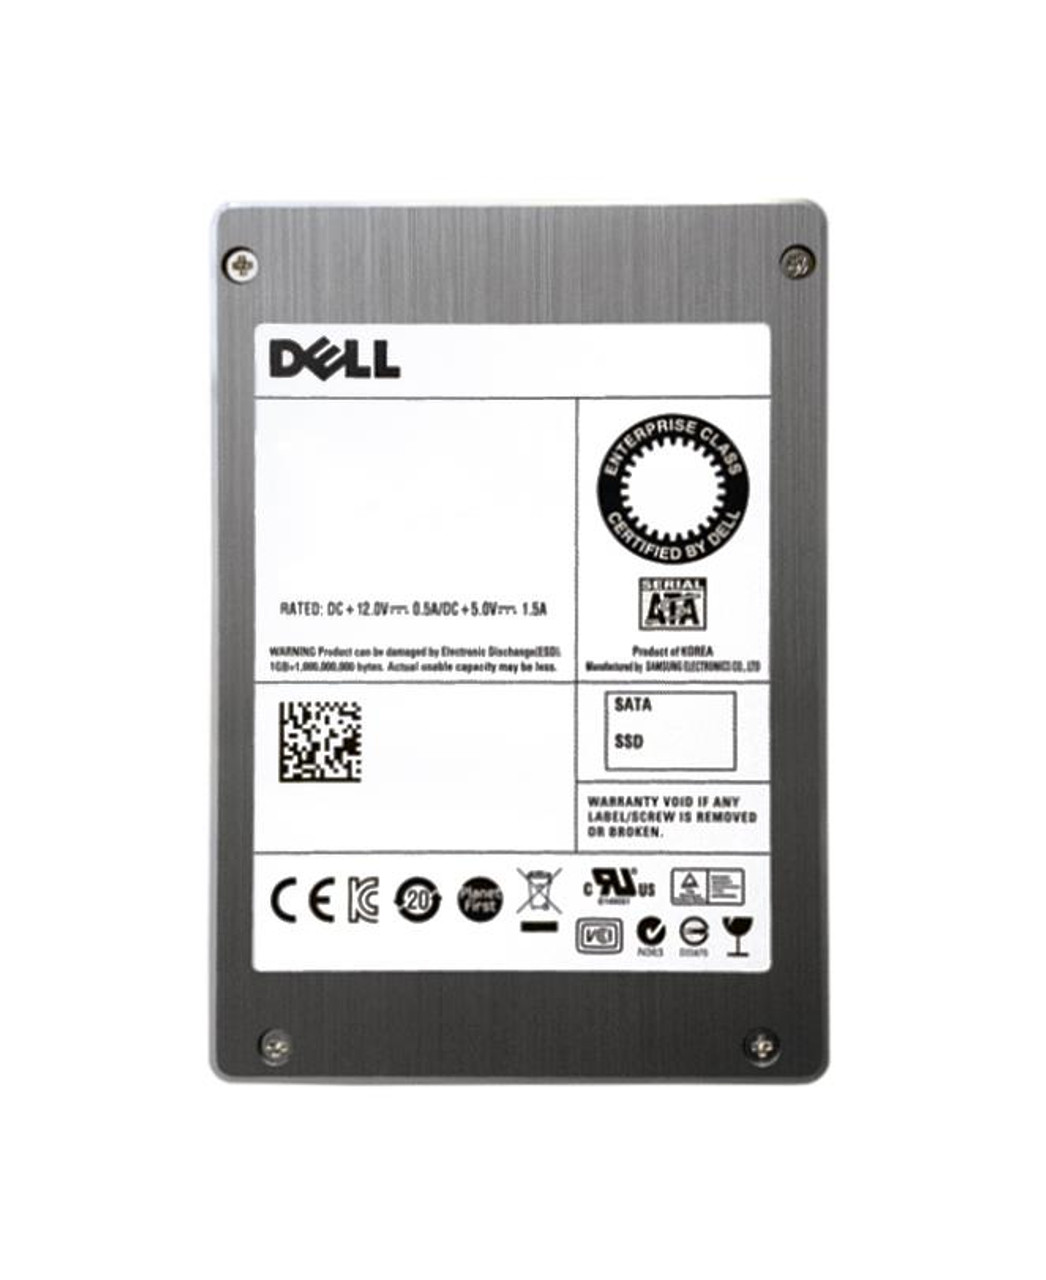 400-AURQ Dell 480GB MLC SATA 6Gbps Mixed Use 2.5-inch Internal Solid State Drive (SSD)